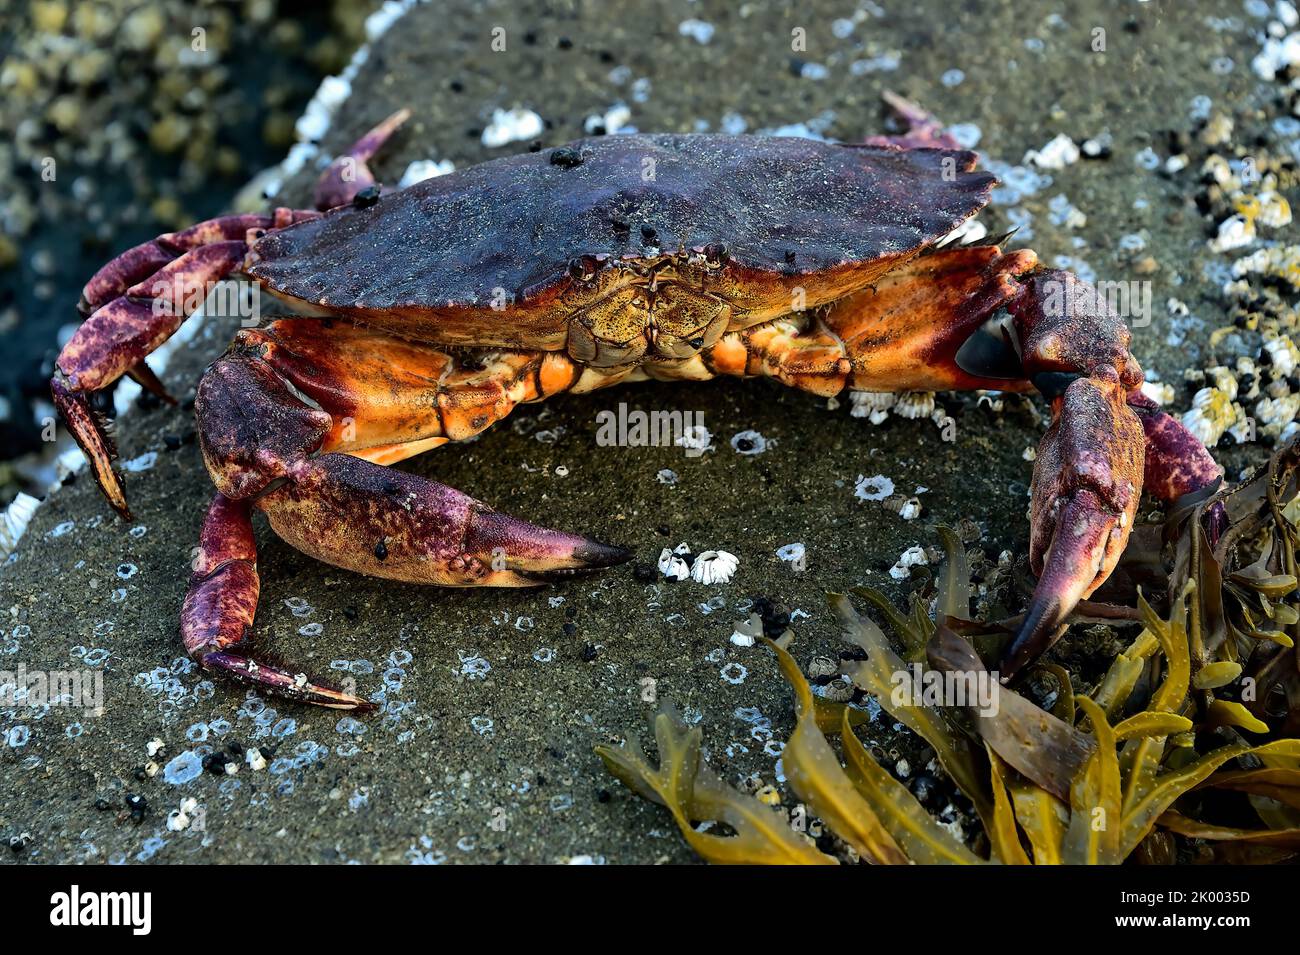 A red rock crab 'Cancer productus',  high on a rocky beach on Vancouver Island British Columbia Canada Stock Photo